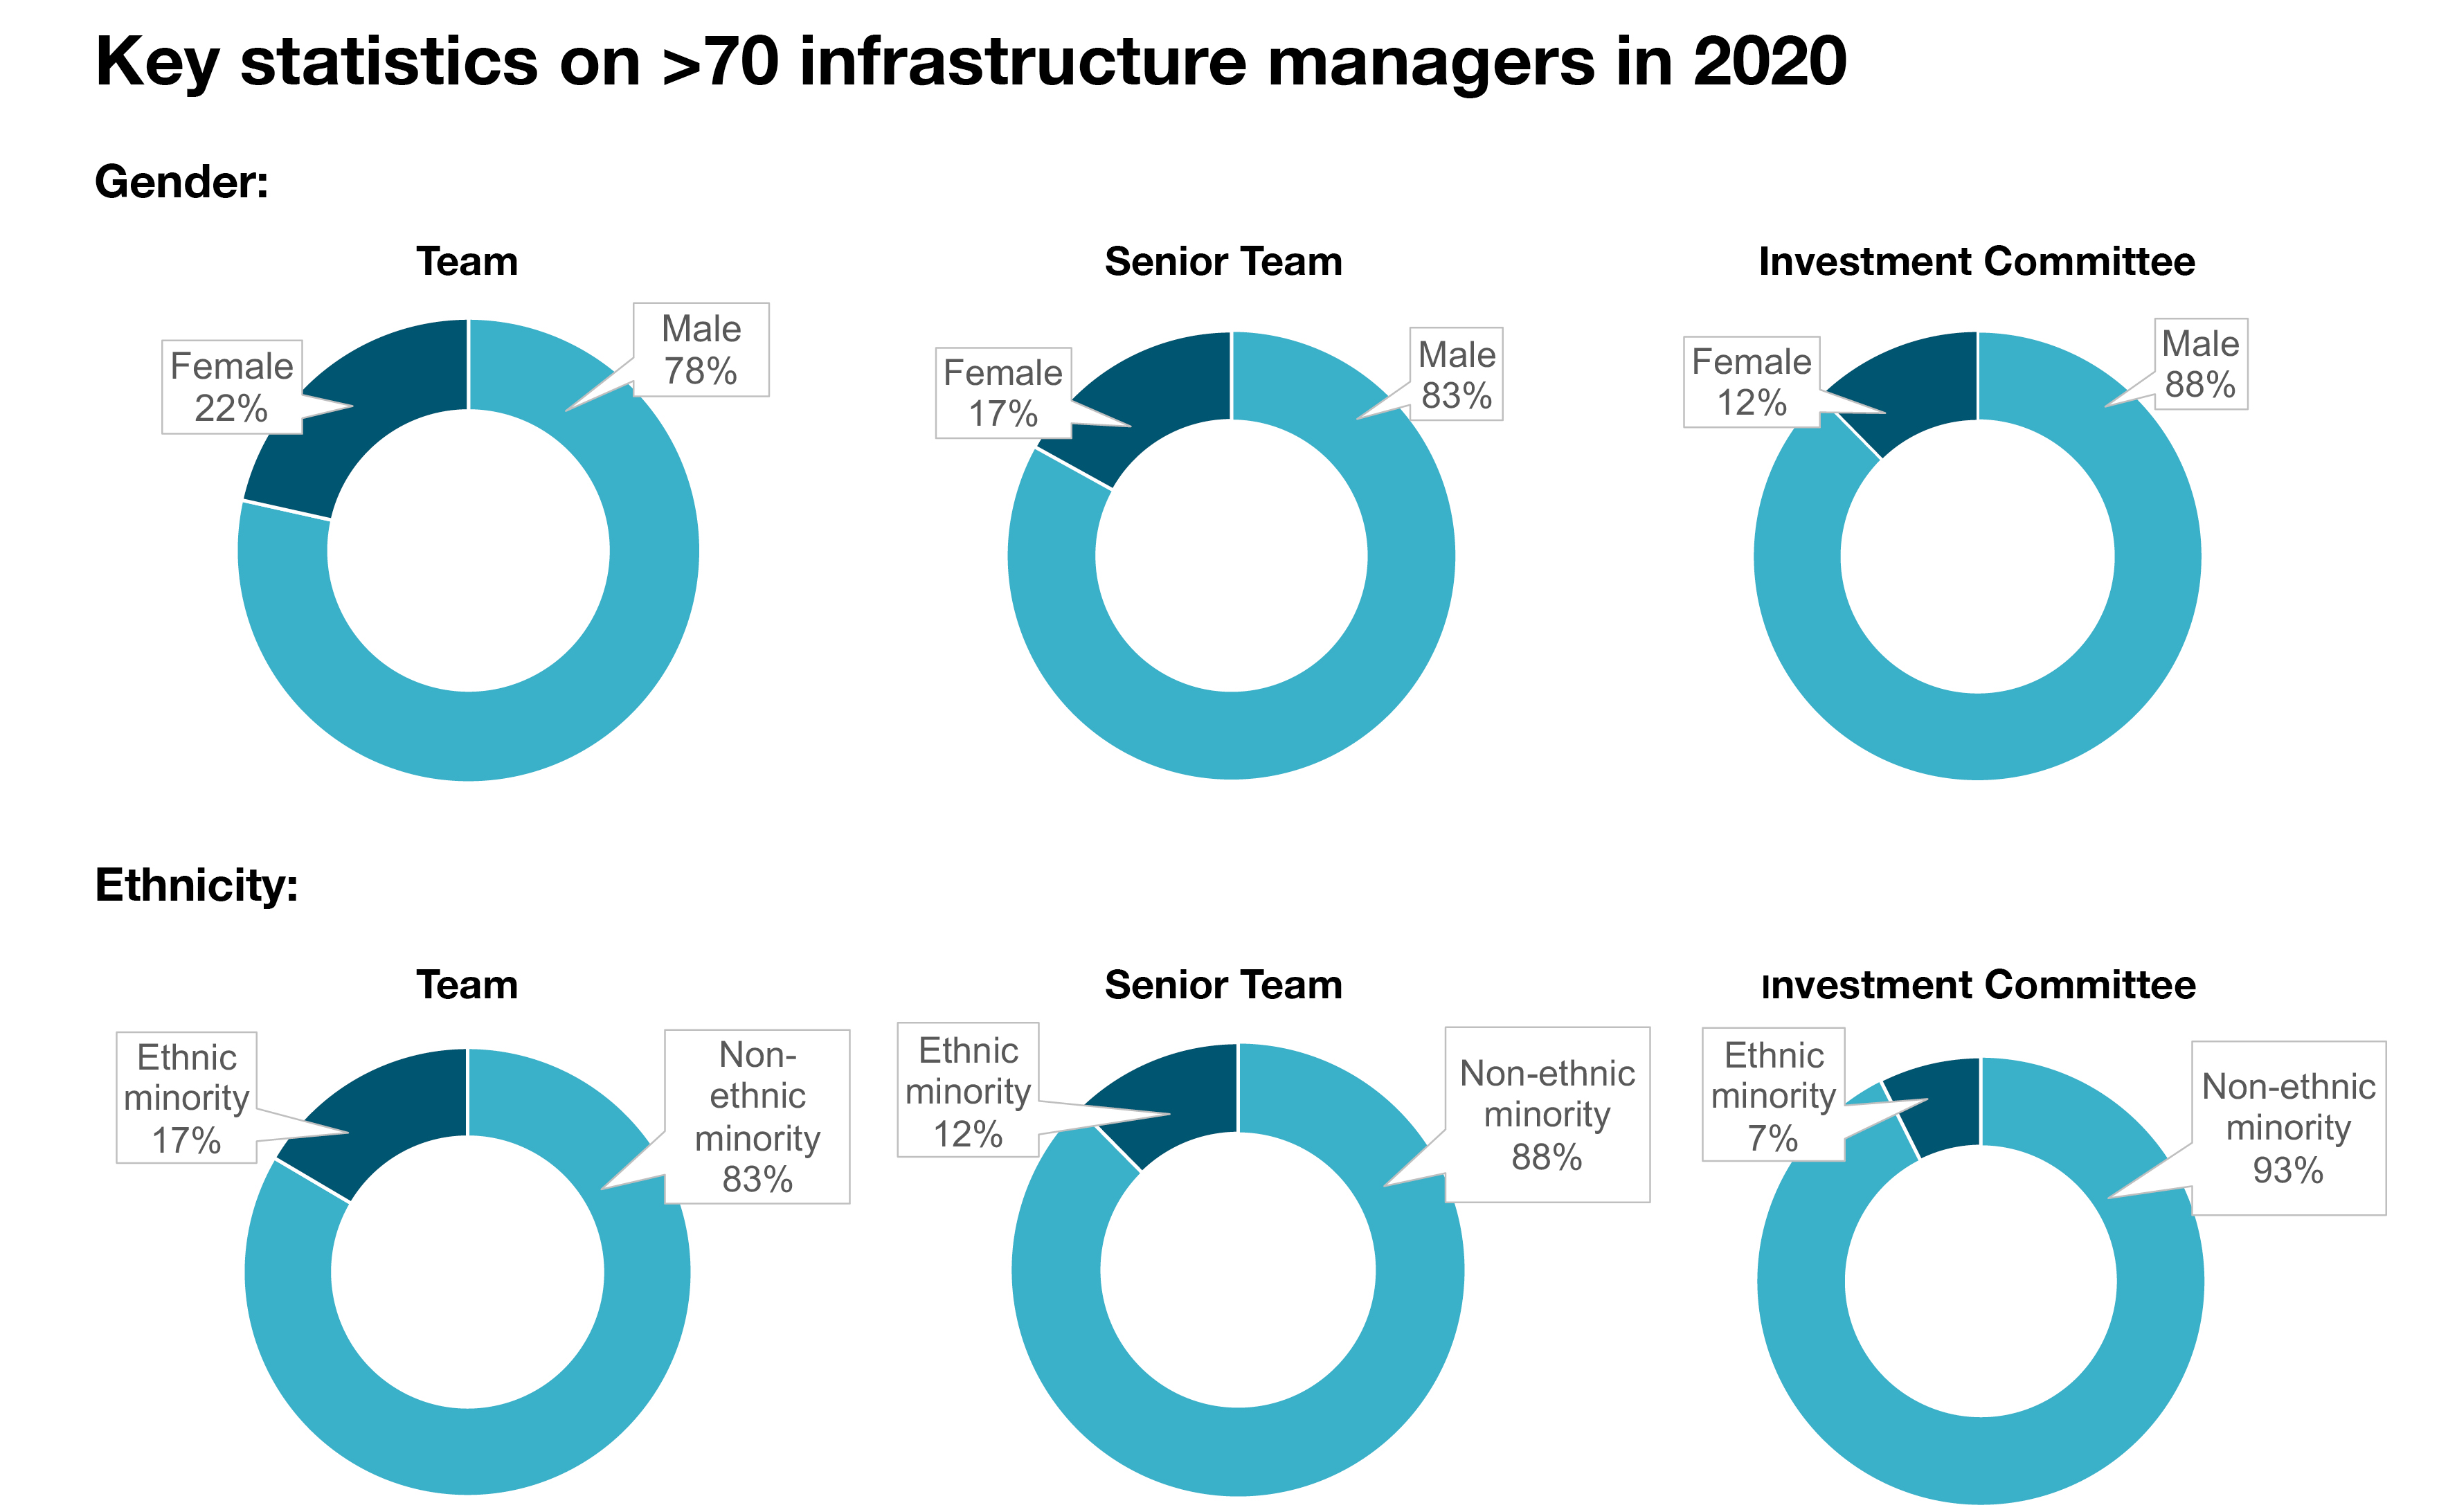 Key Statistics on Infrastructure Managers